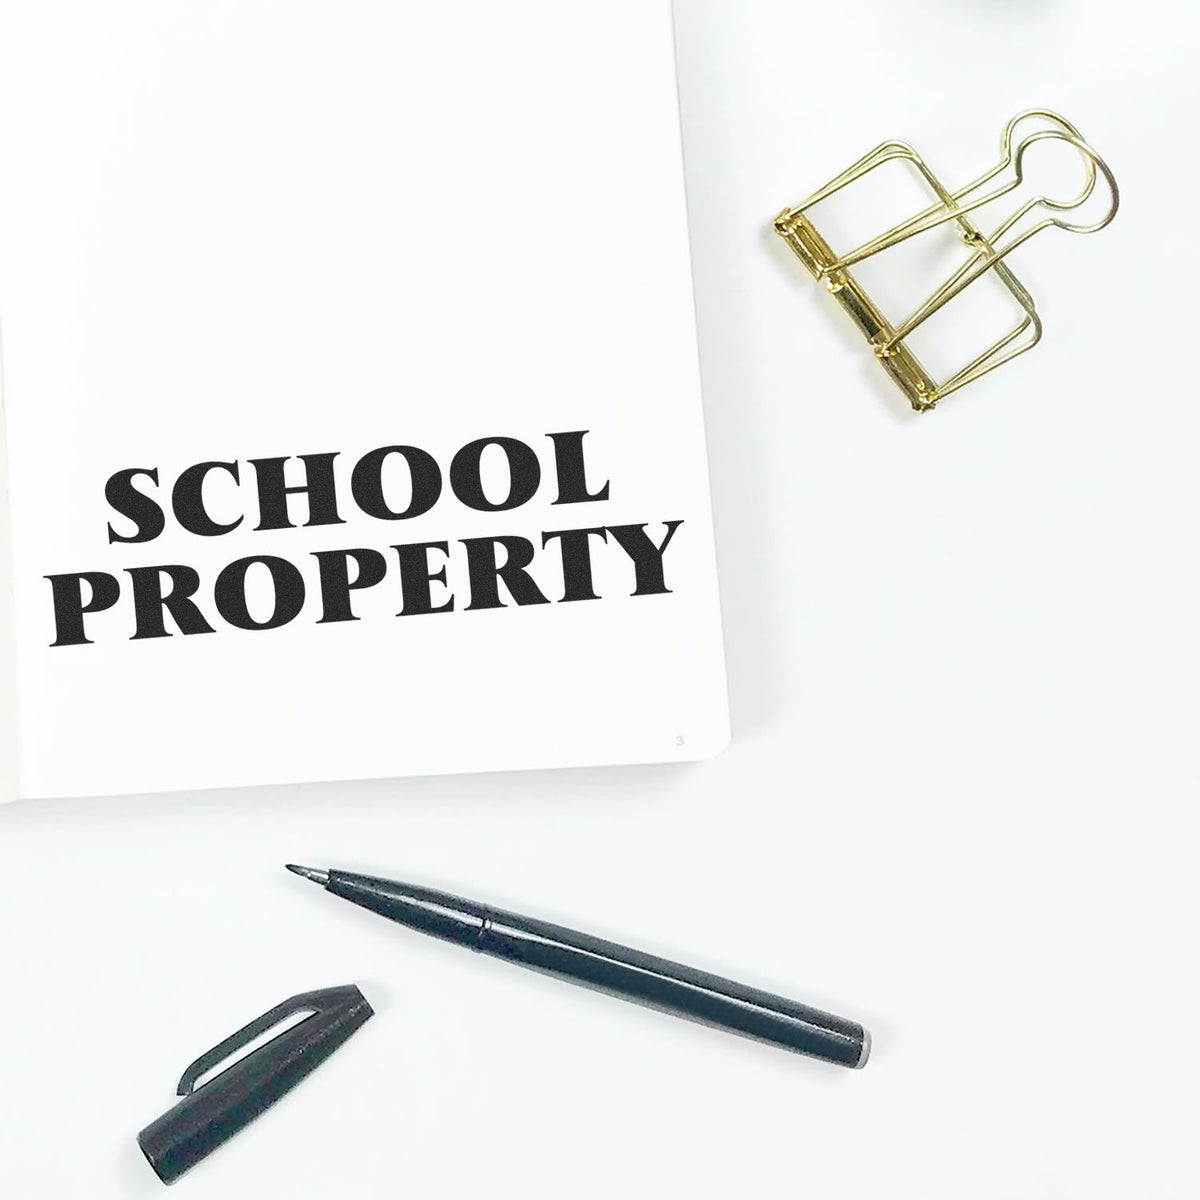 School Property Rubber Stamp Lifestyle Photo